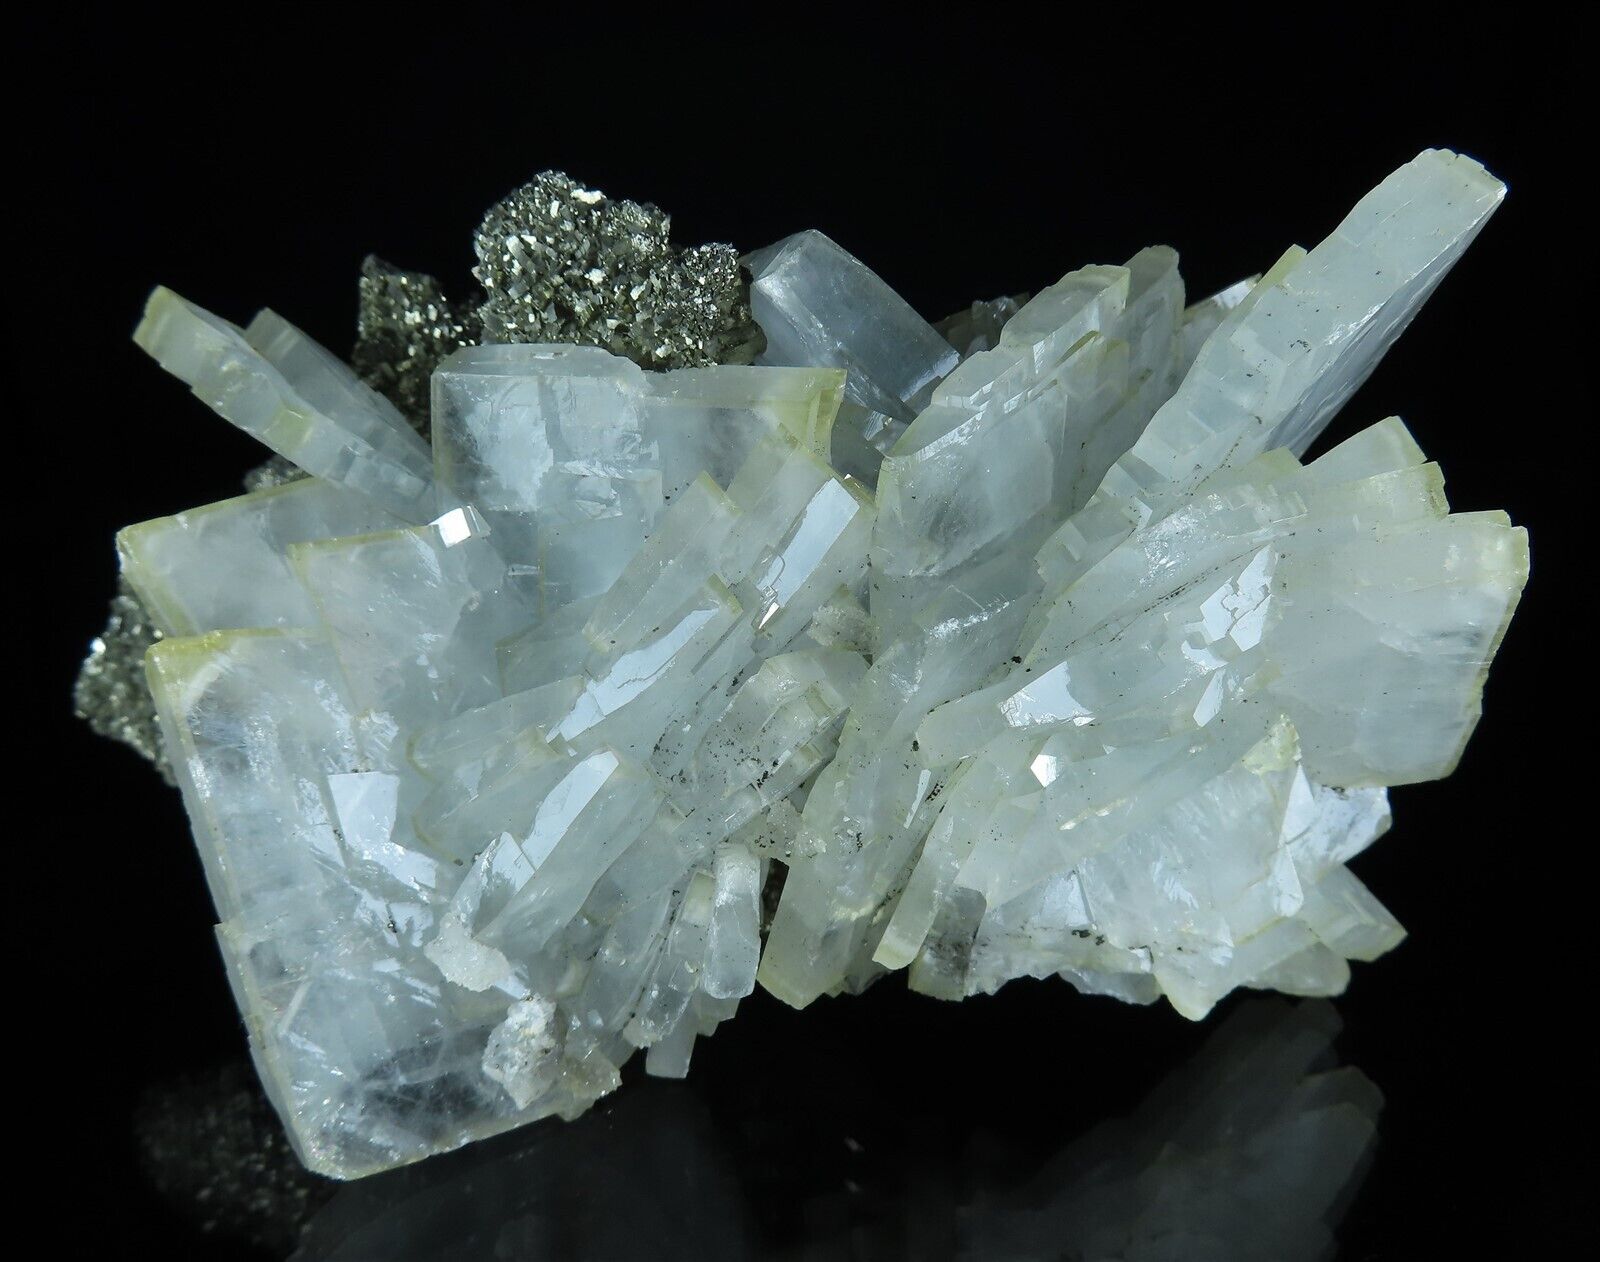 6 inch * Light blue BARITE crystals on Marcasite * Bou Nahas Mine, Morocco